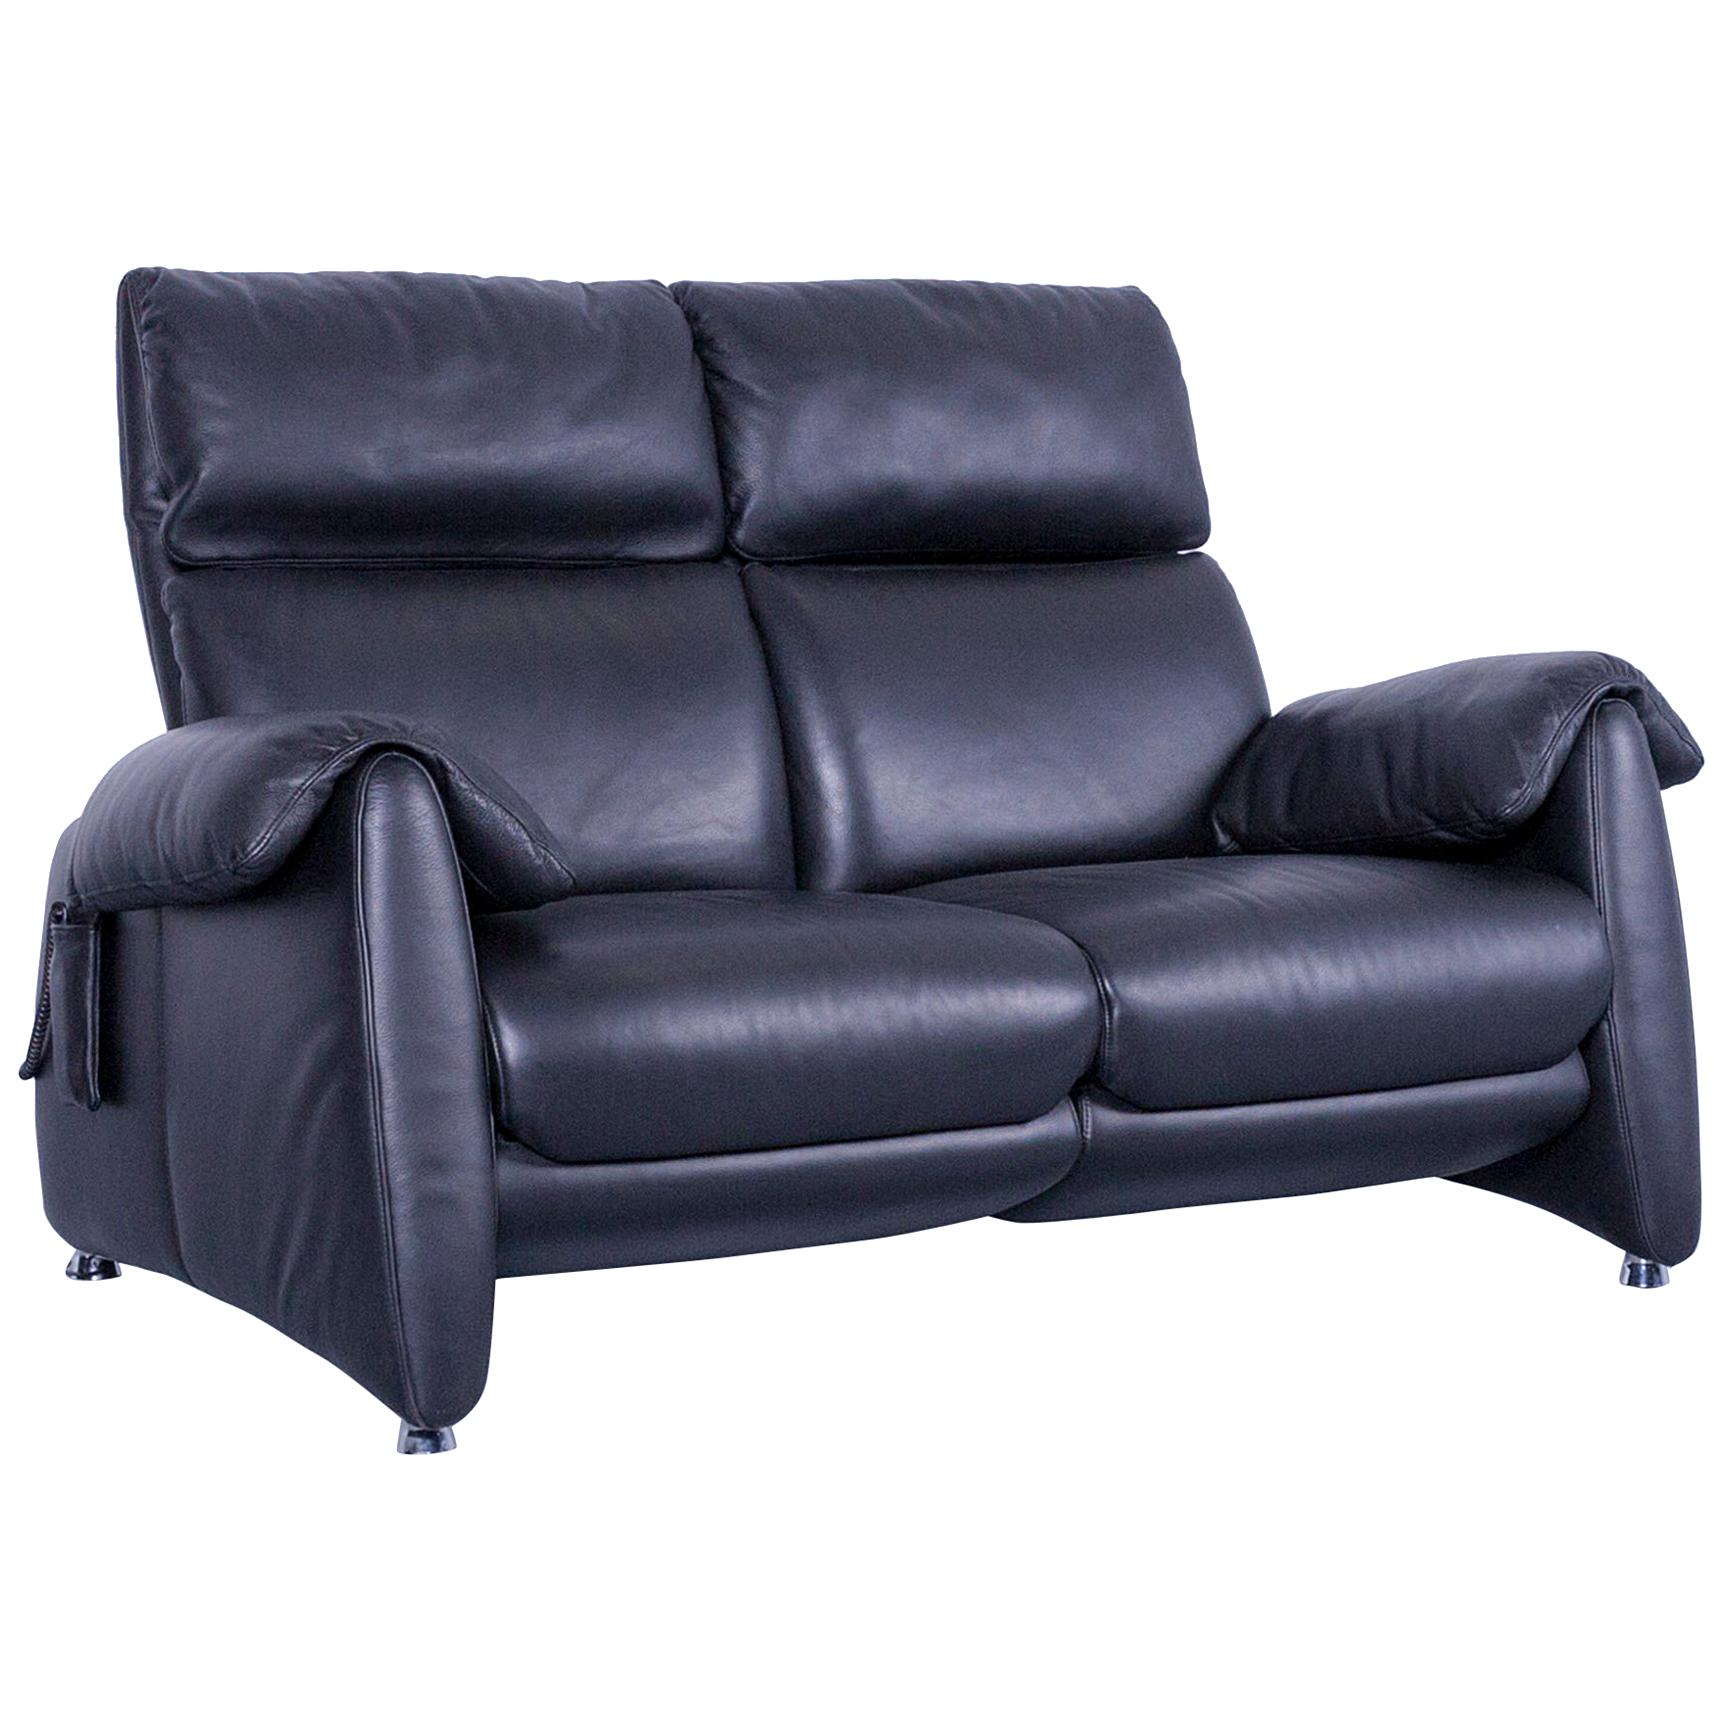 Designer Sofa, Black Leather Two-Seat Couch, Modern Electric Recliner